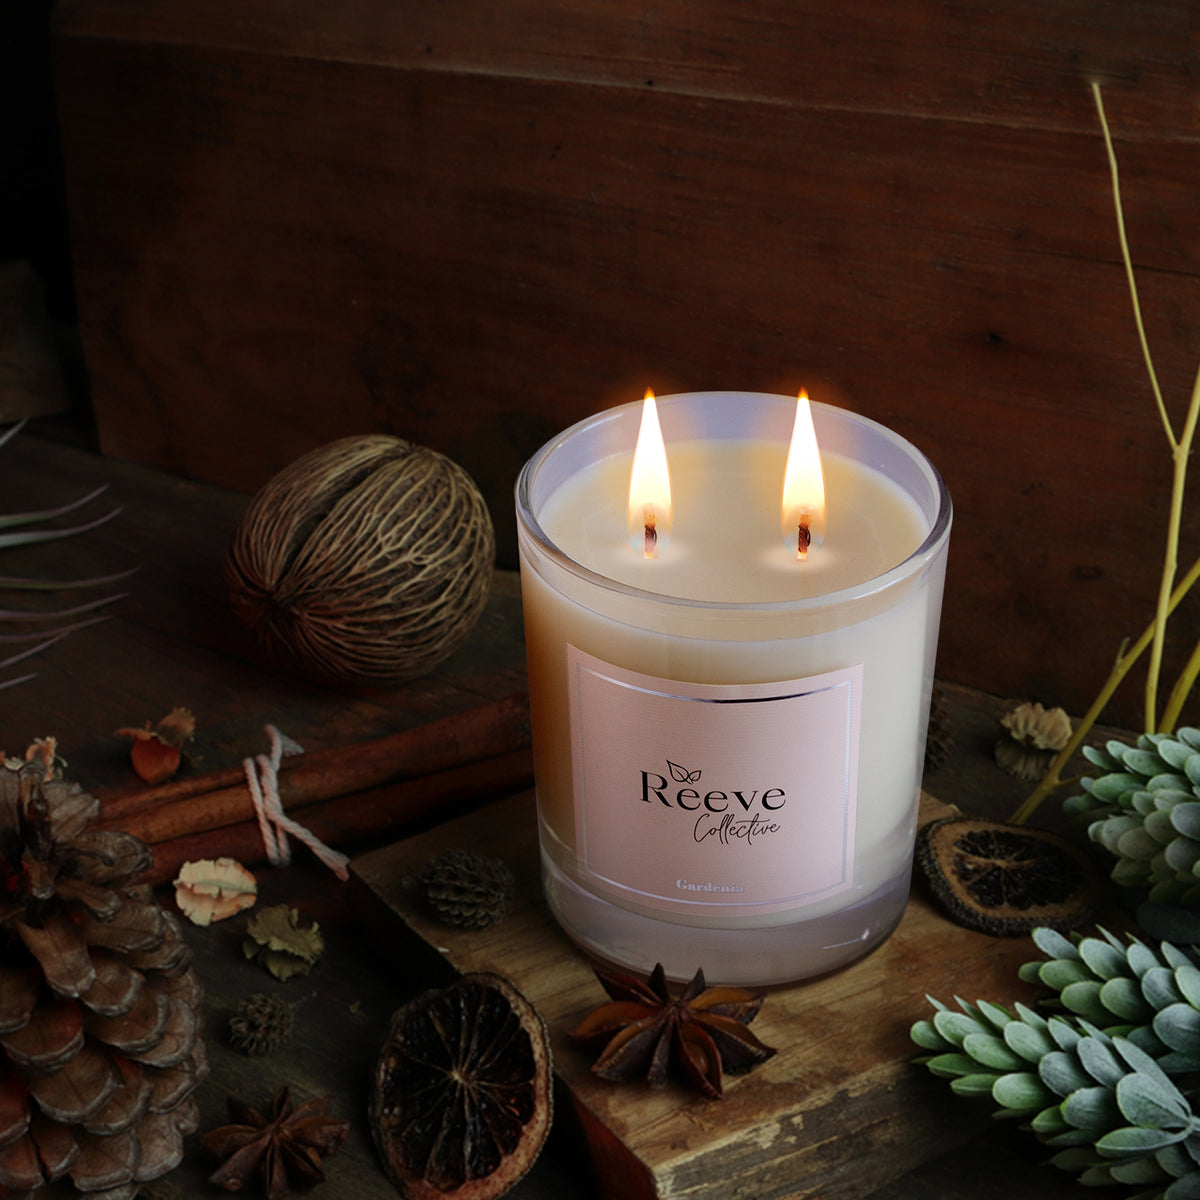 reeve collective scented candles, bedroom best scented candles, luxury candle brands, luxury scented candles, top 10 Australian scented candles, natural soy wax candles, best luxury scented candles, best Aussie made candles, scented candles australia